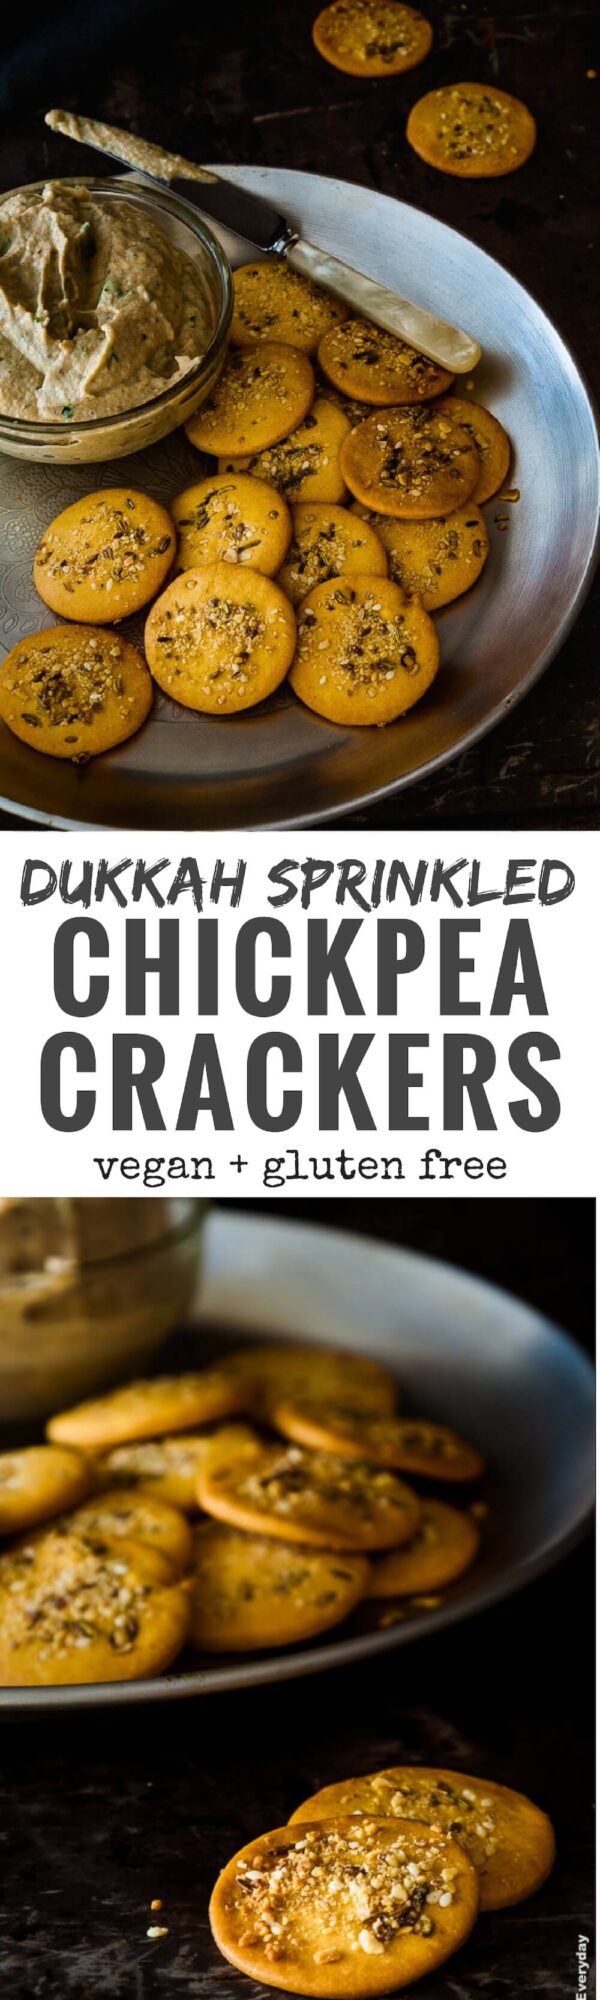 These fantastic vegan and gluten-free chickpea crackers are sprinkled with dukkah and perfect for afternoon snacking.